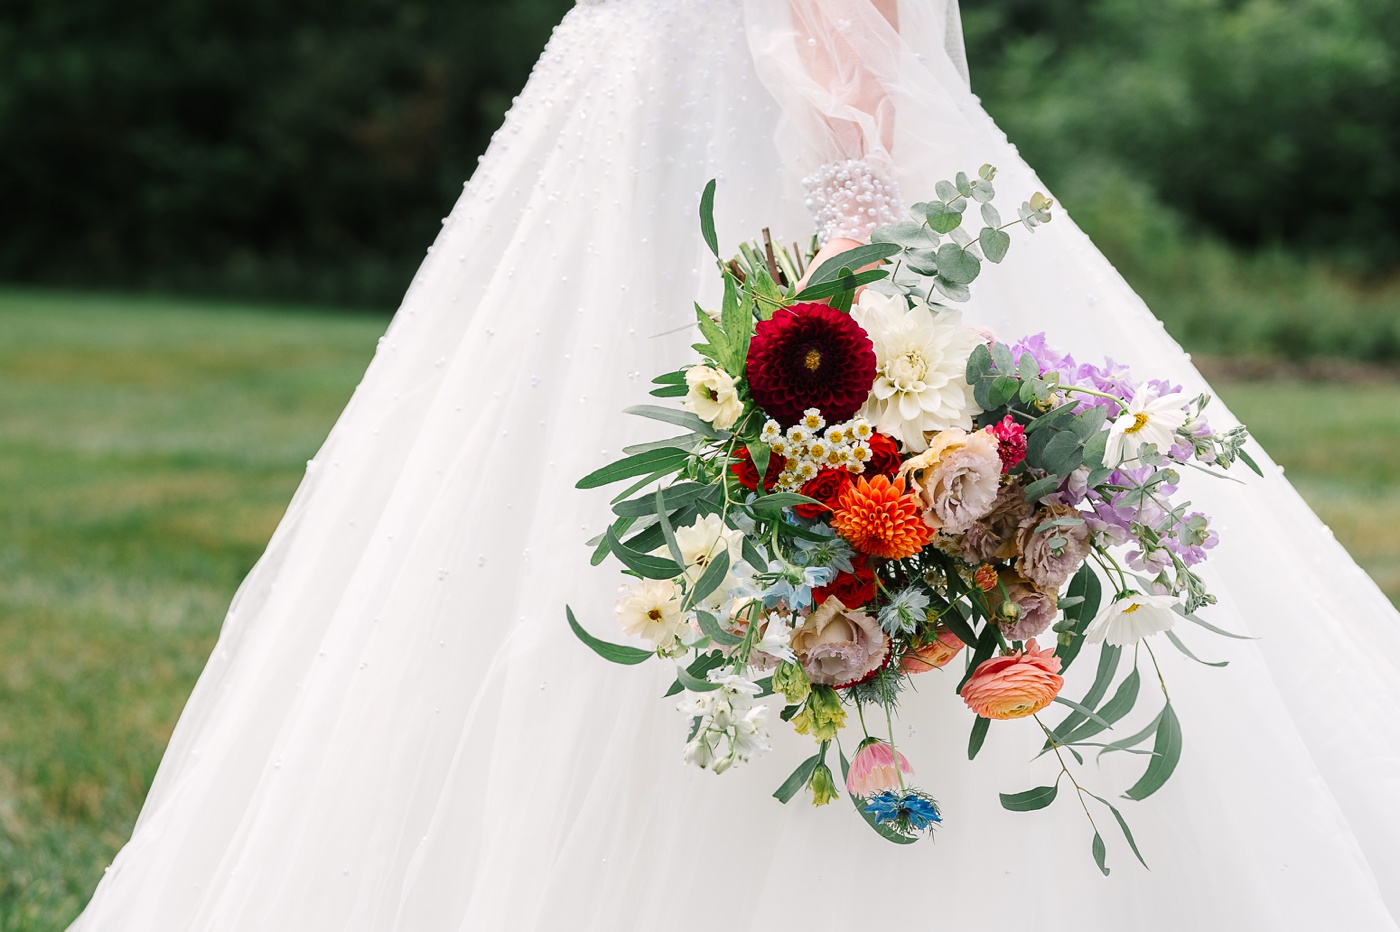 Spring wedding bouquet filled with dahlias, ranunculus, and cosmos by June Daisy Co.